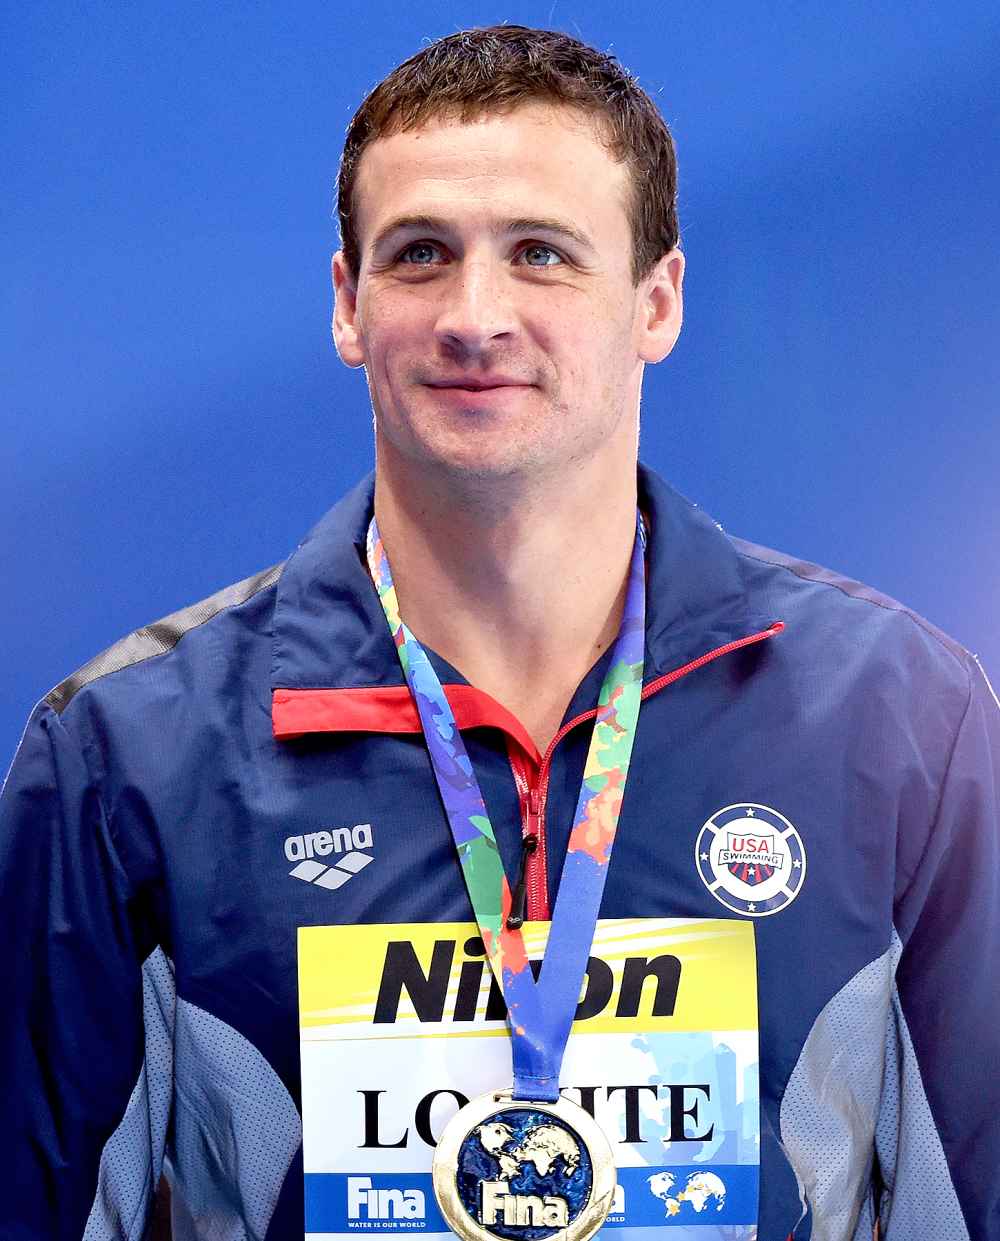 Ryan Lochte of the United States poses during the medal ceremony for the Men's 200m Individual Medley Final on day thirteen of the 16th FINA World Championships at the Kazan Arena on August 6, 2015 in Kazan, Russia.